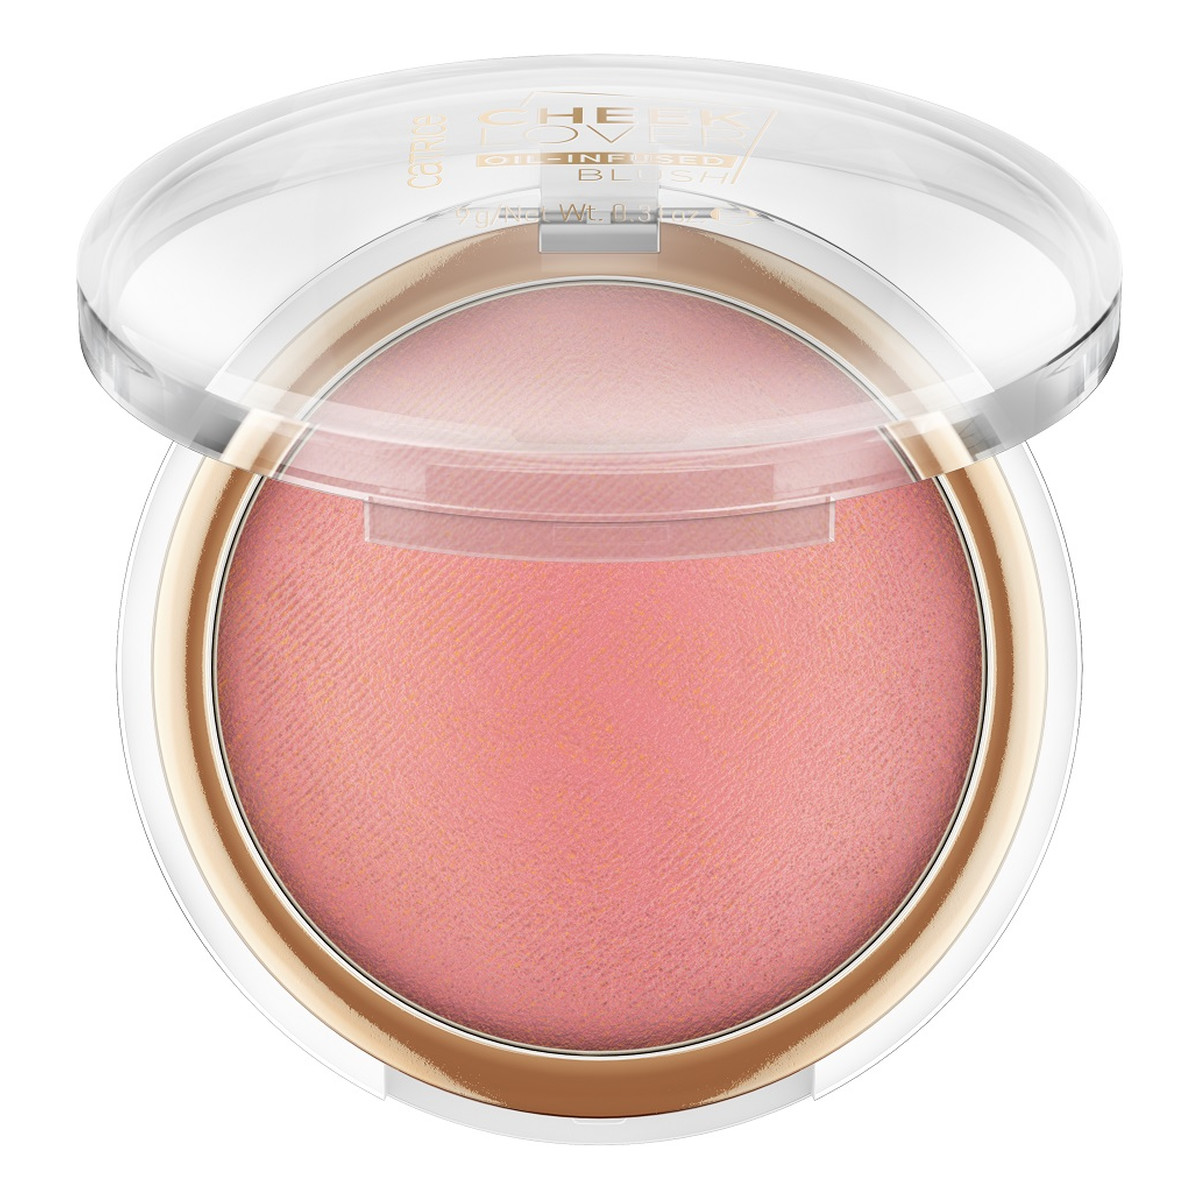 Catrice Cheek lover oil-infused blush róż do policzków 010 blooming hibiscus 9g